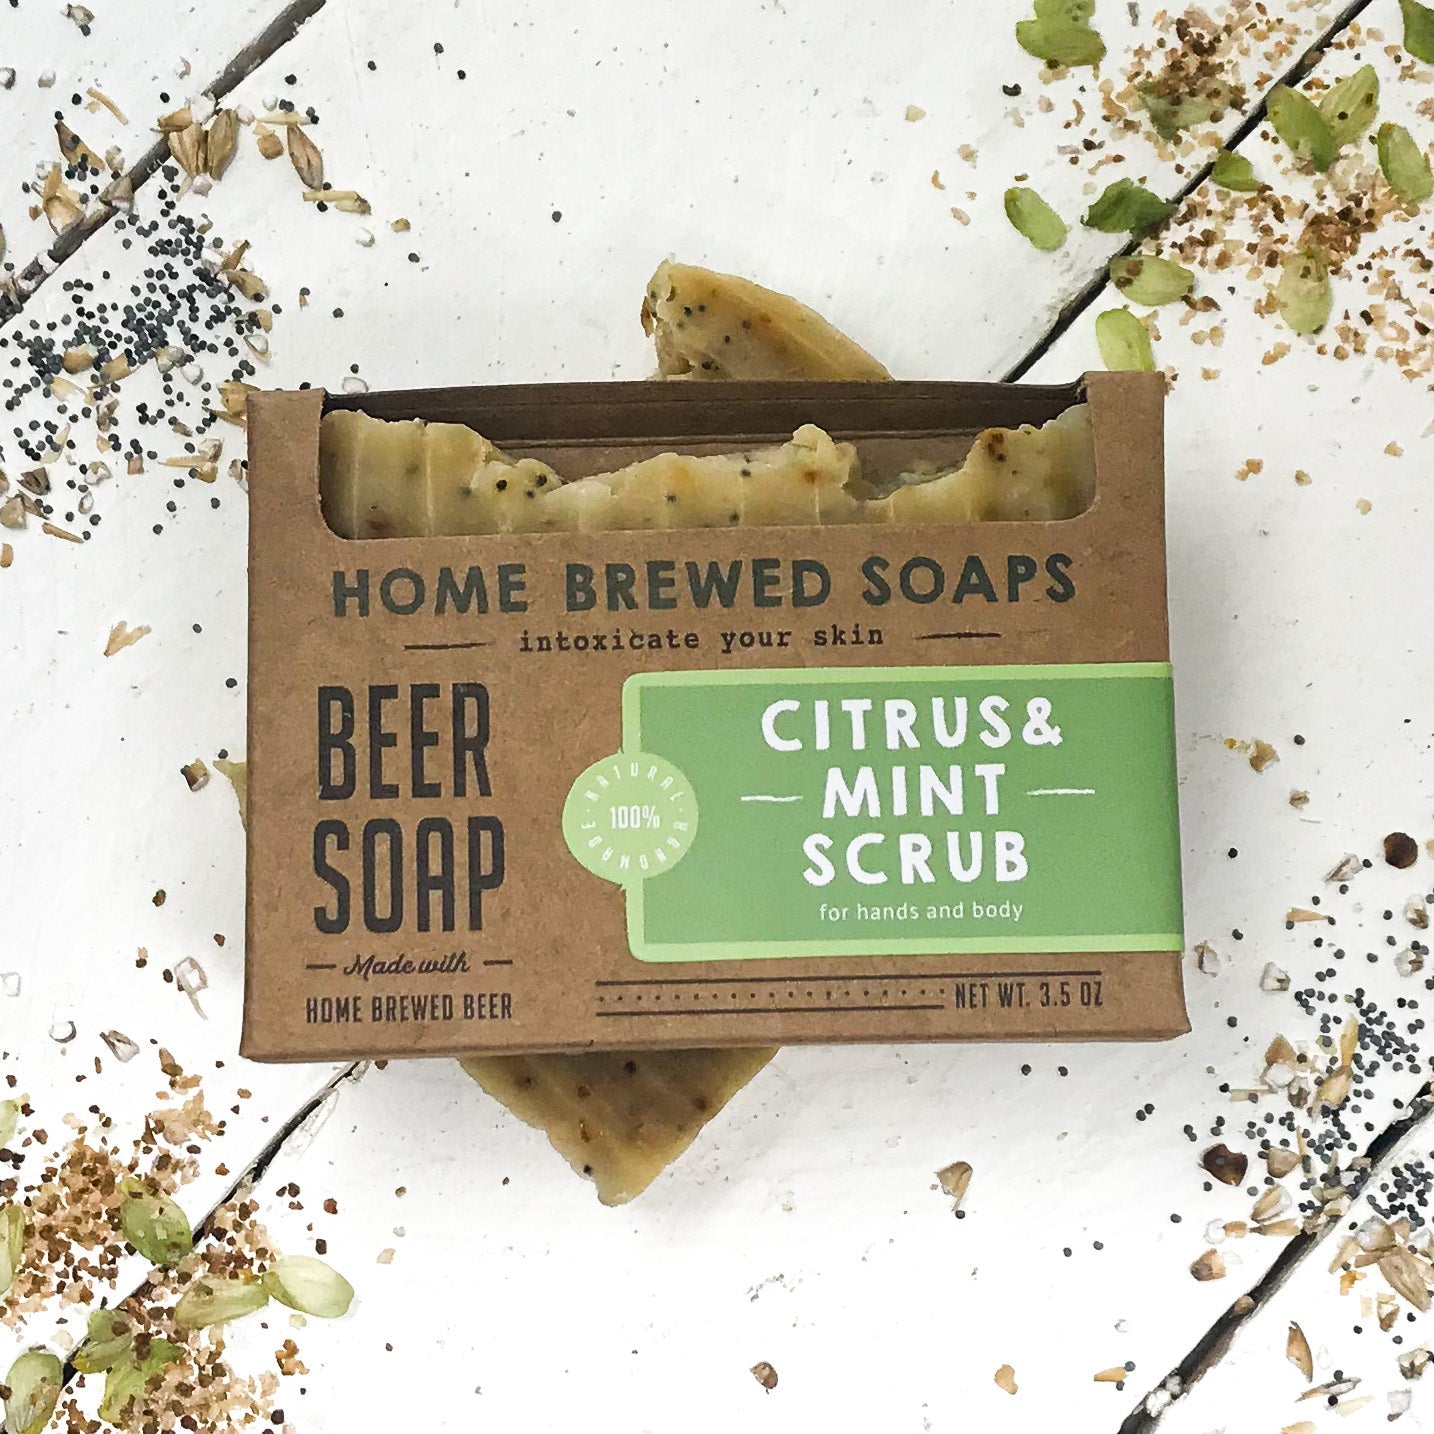 Beer Soap - Citrus & Mint Scrub -  Natural Soap - Exfoliating by Home Brewed Soaps